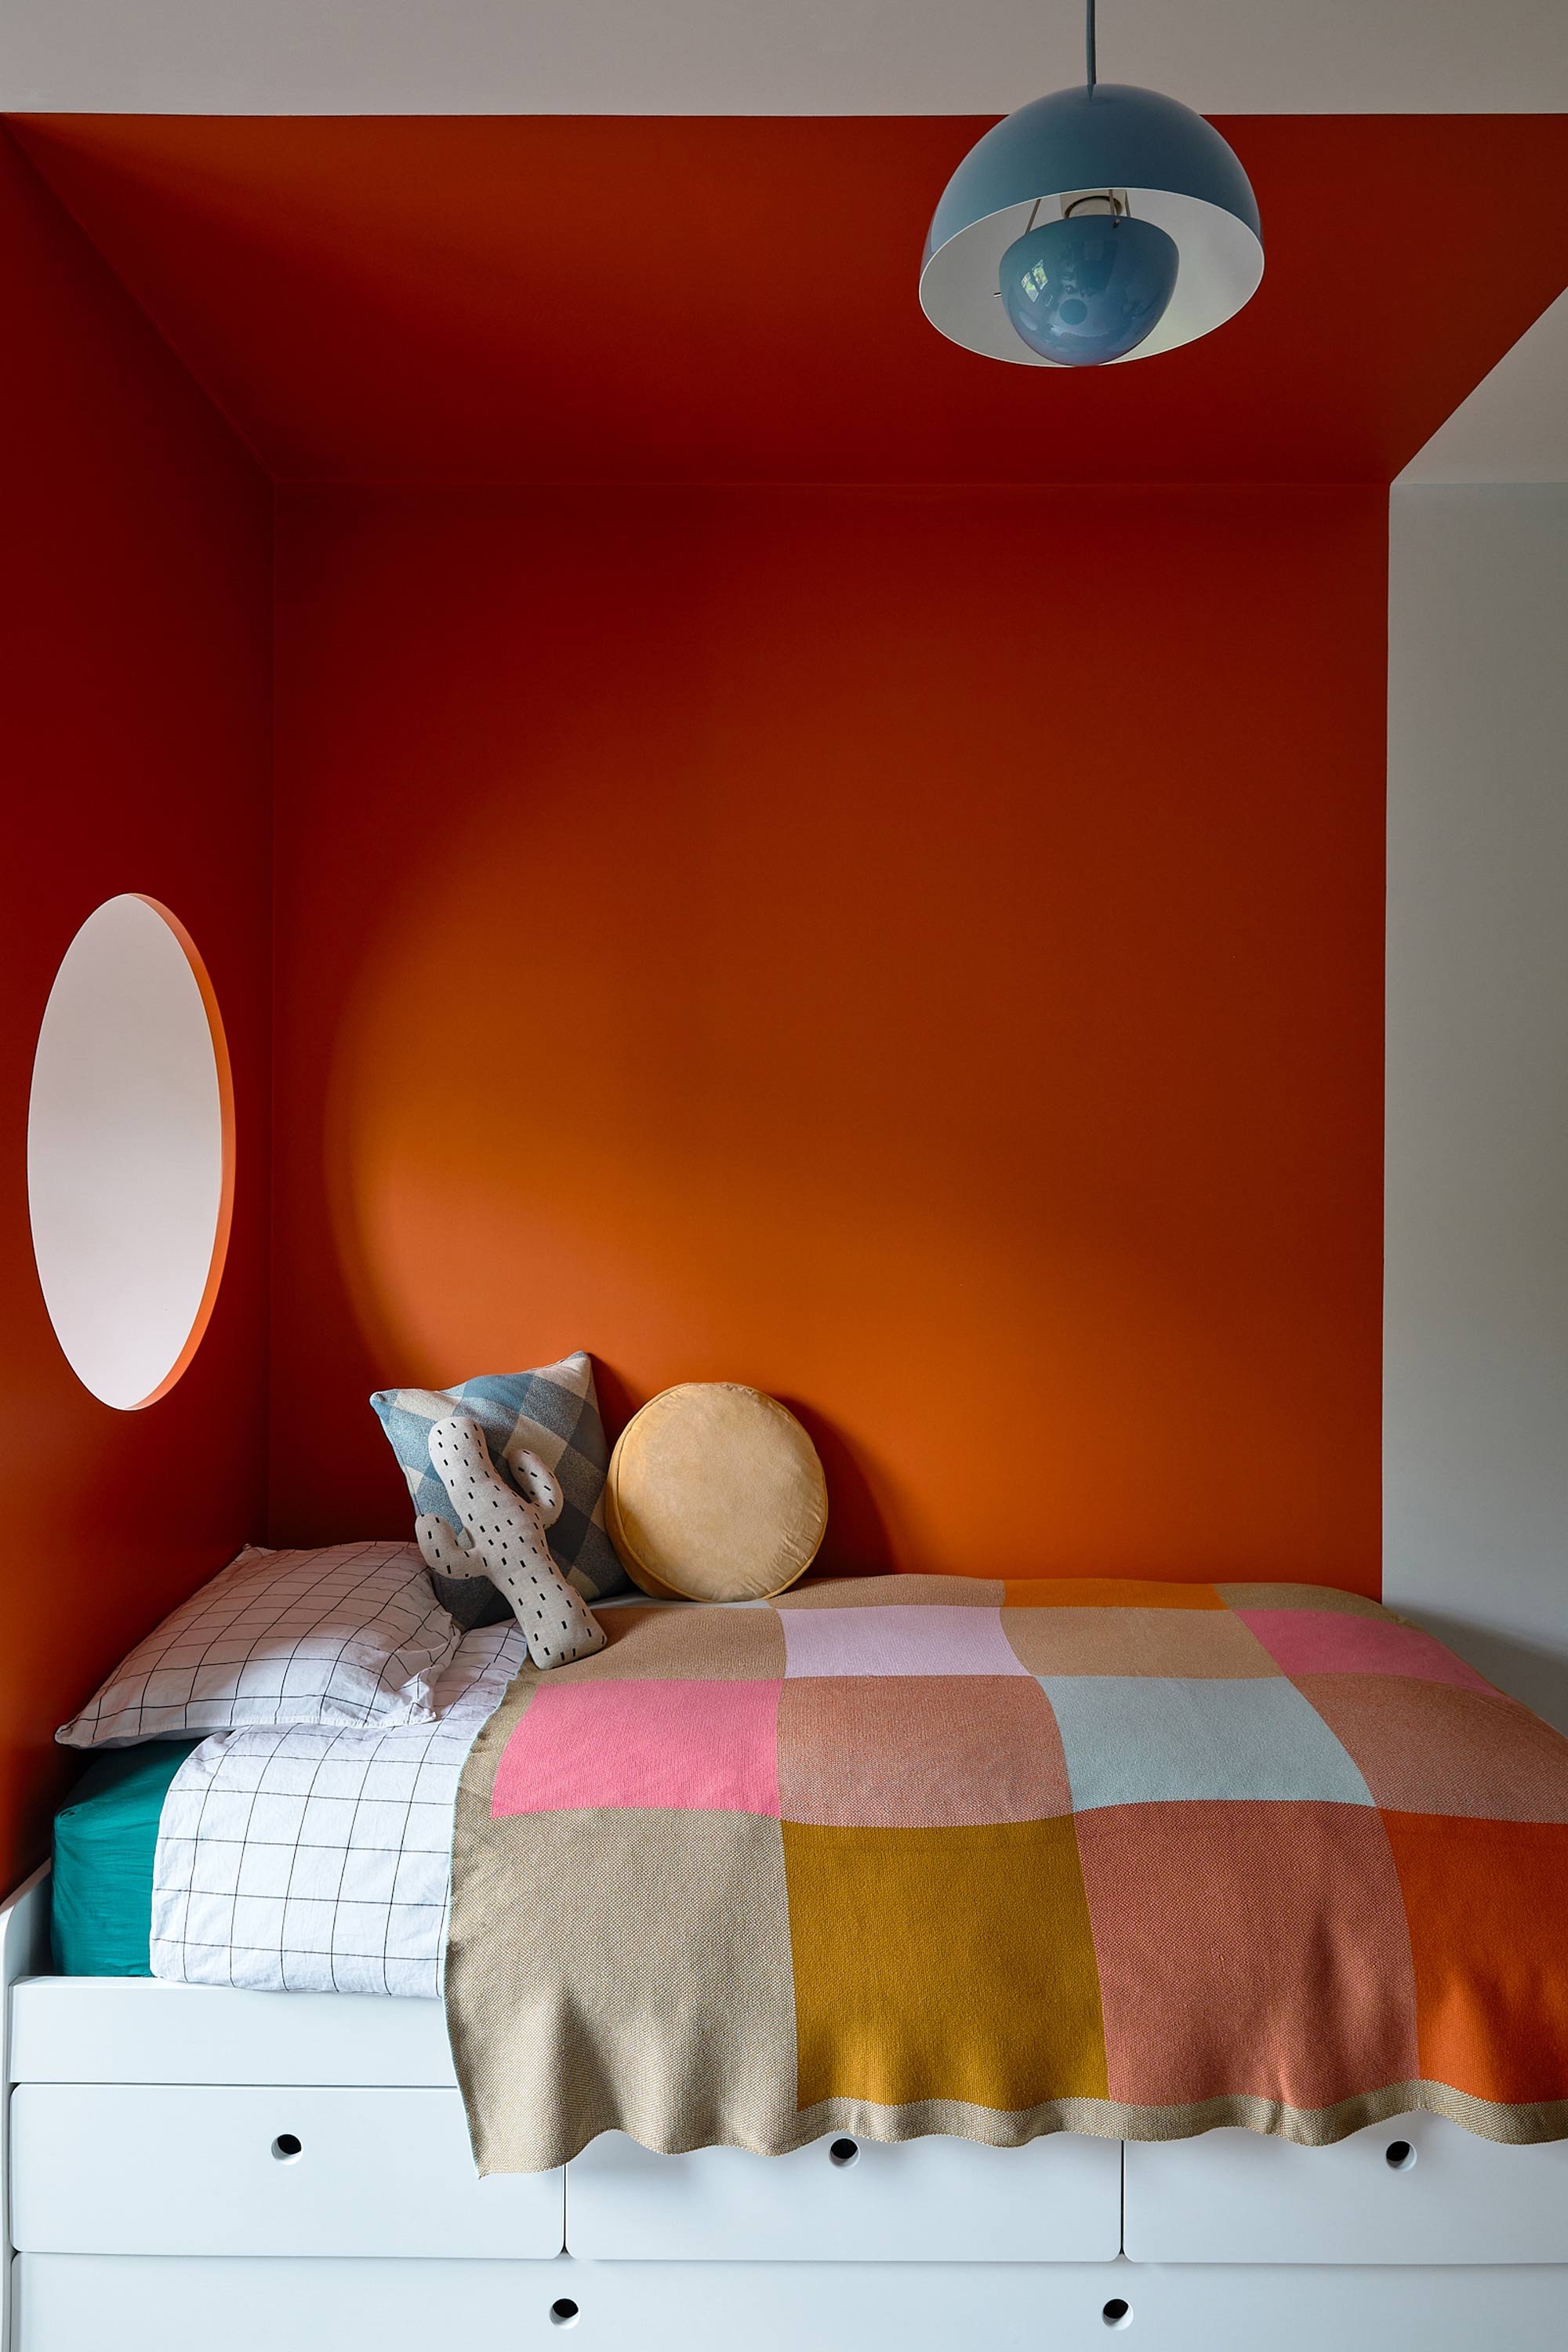 bed-area-with-drawers-underneath-and-orange-wall-with-porthole.jpg